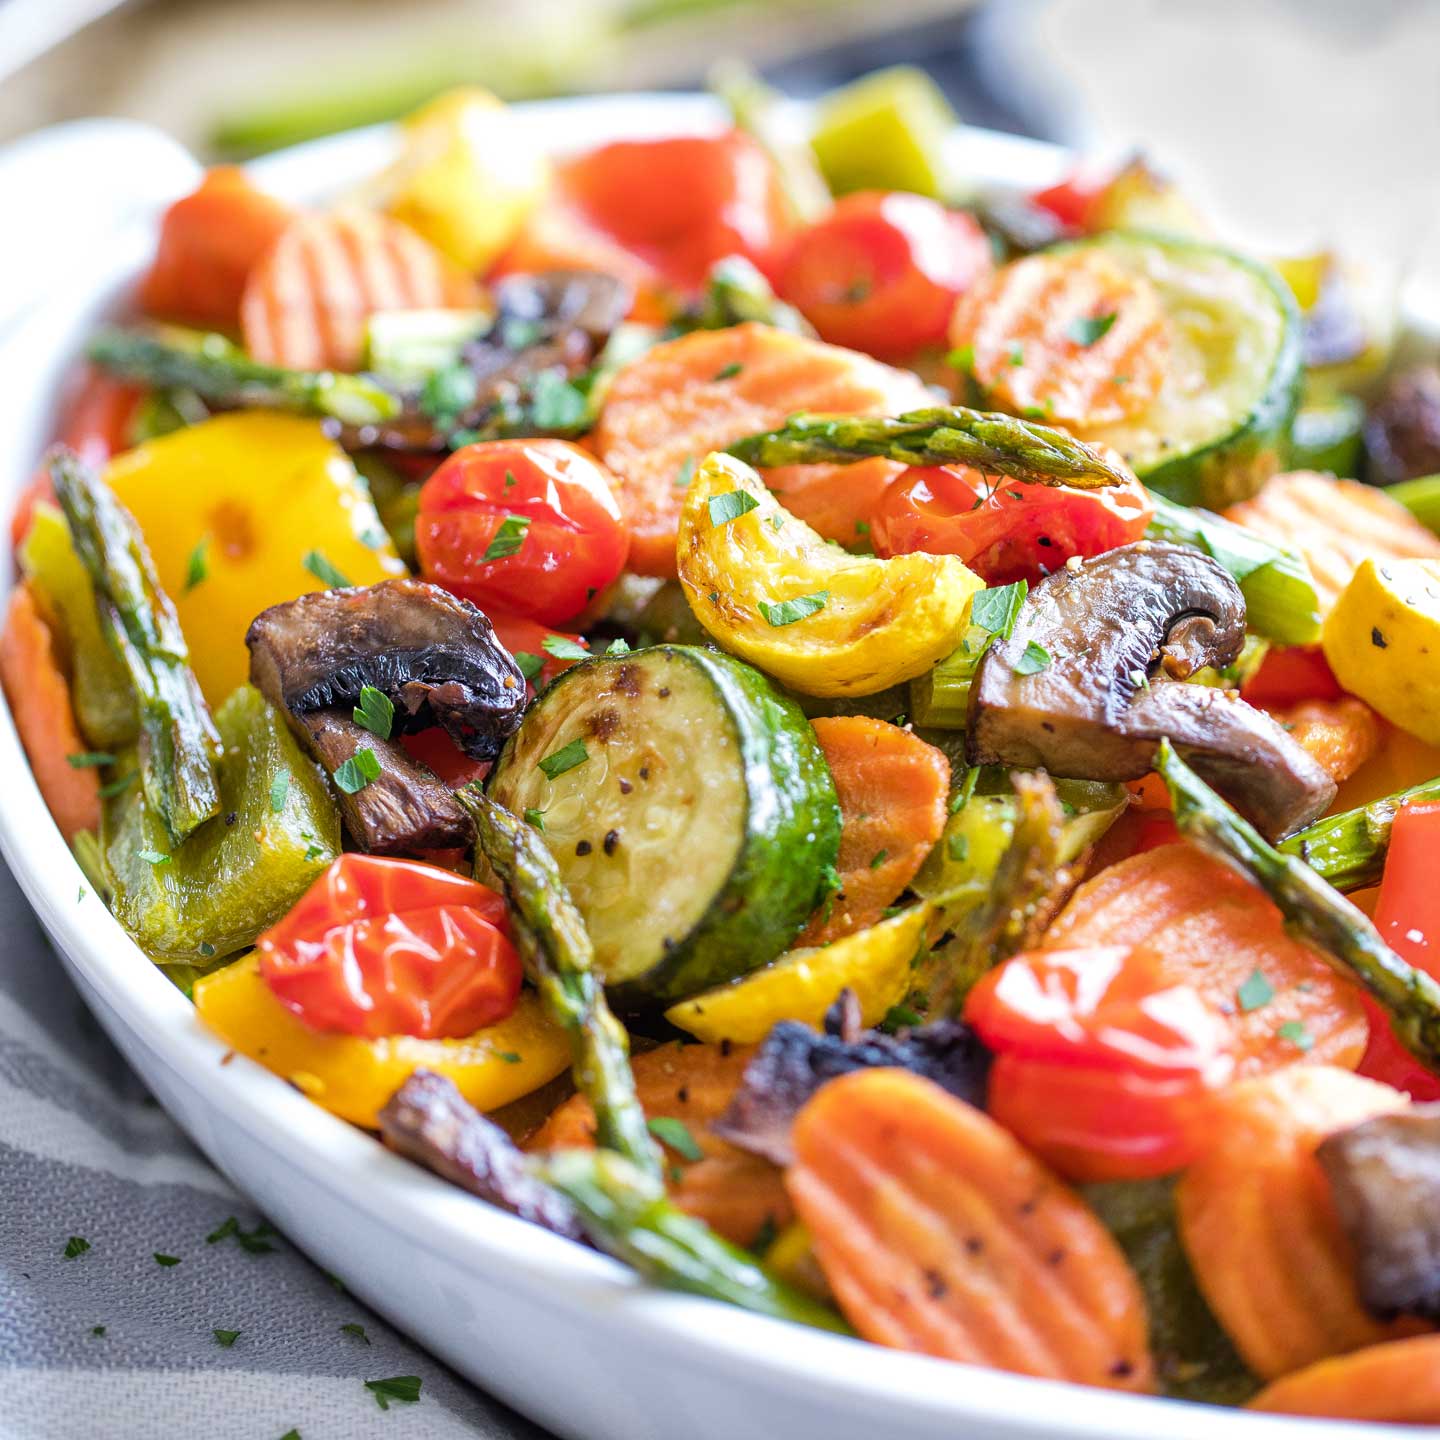 I. Introduction to Oven-Roasted Vegetable Medley